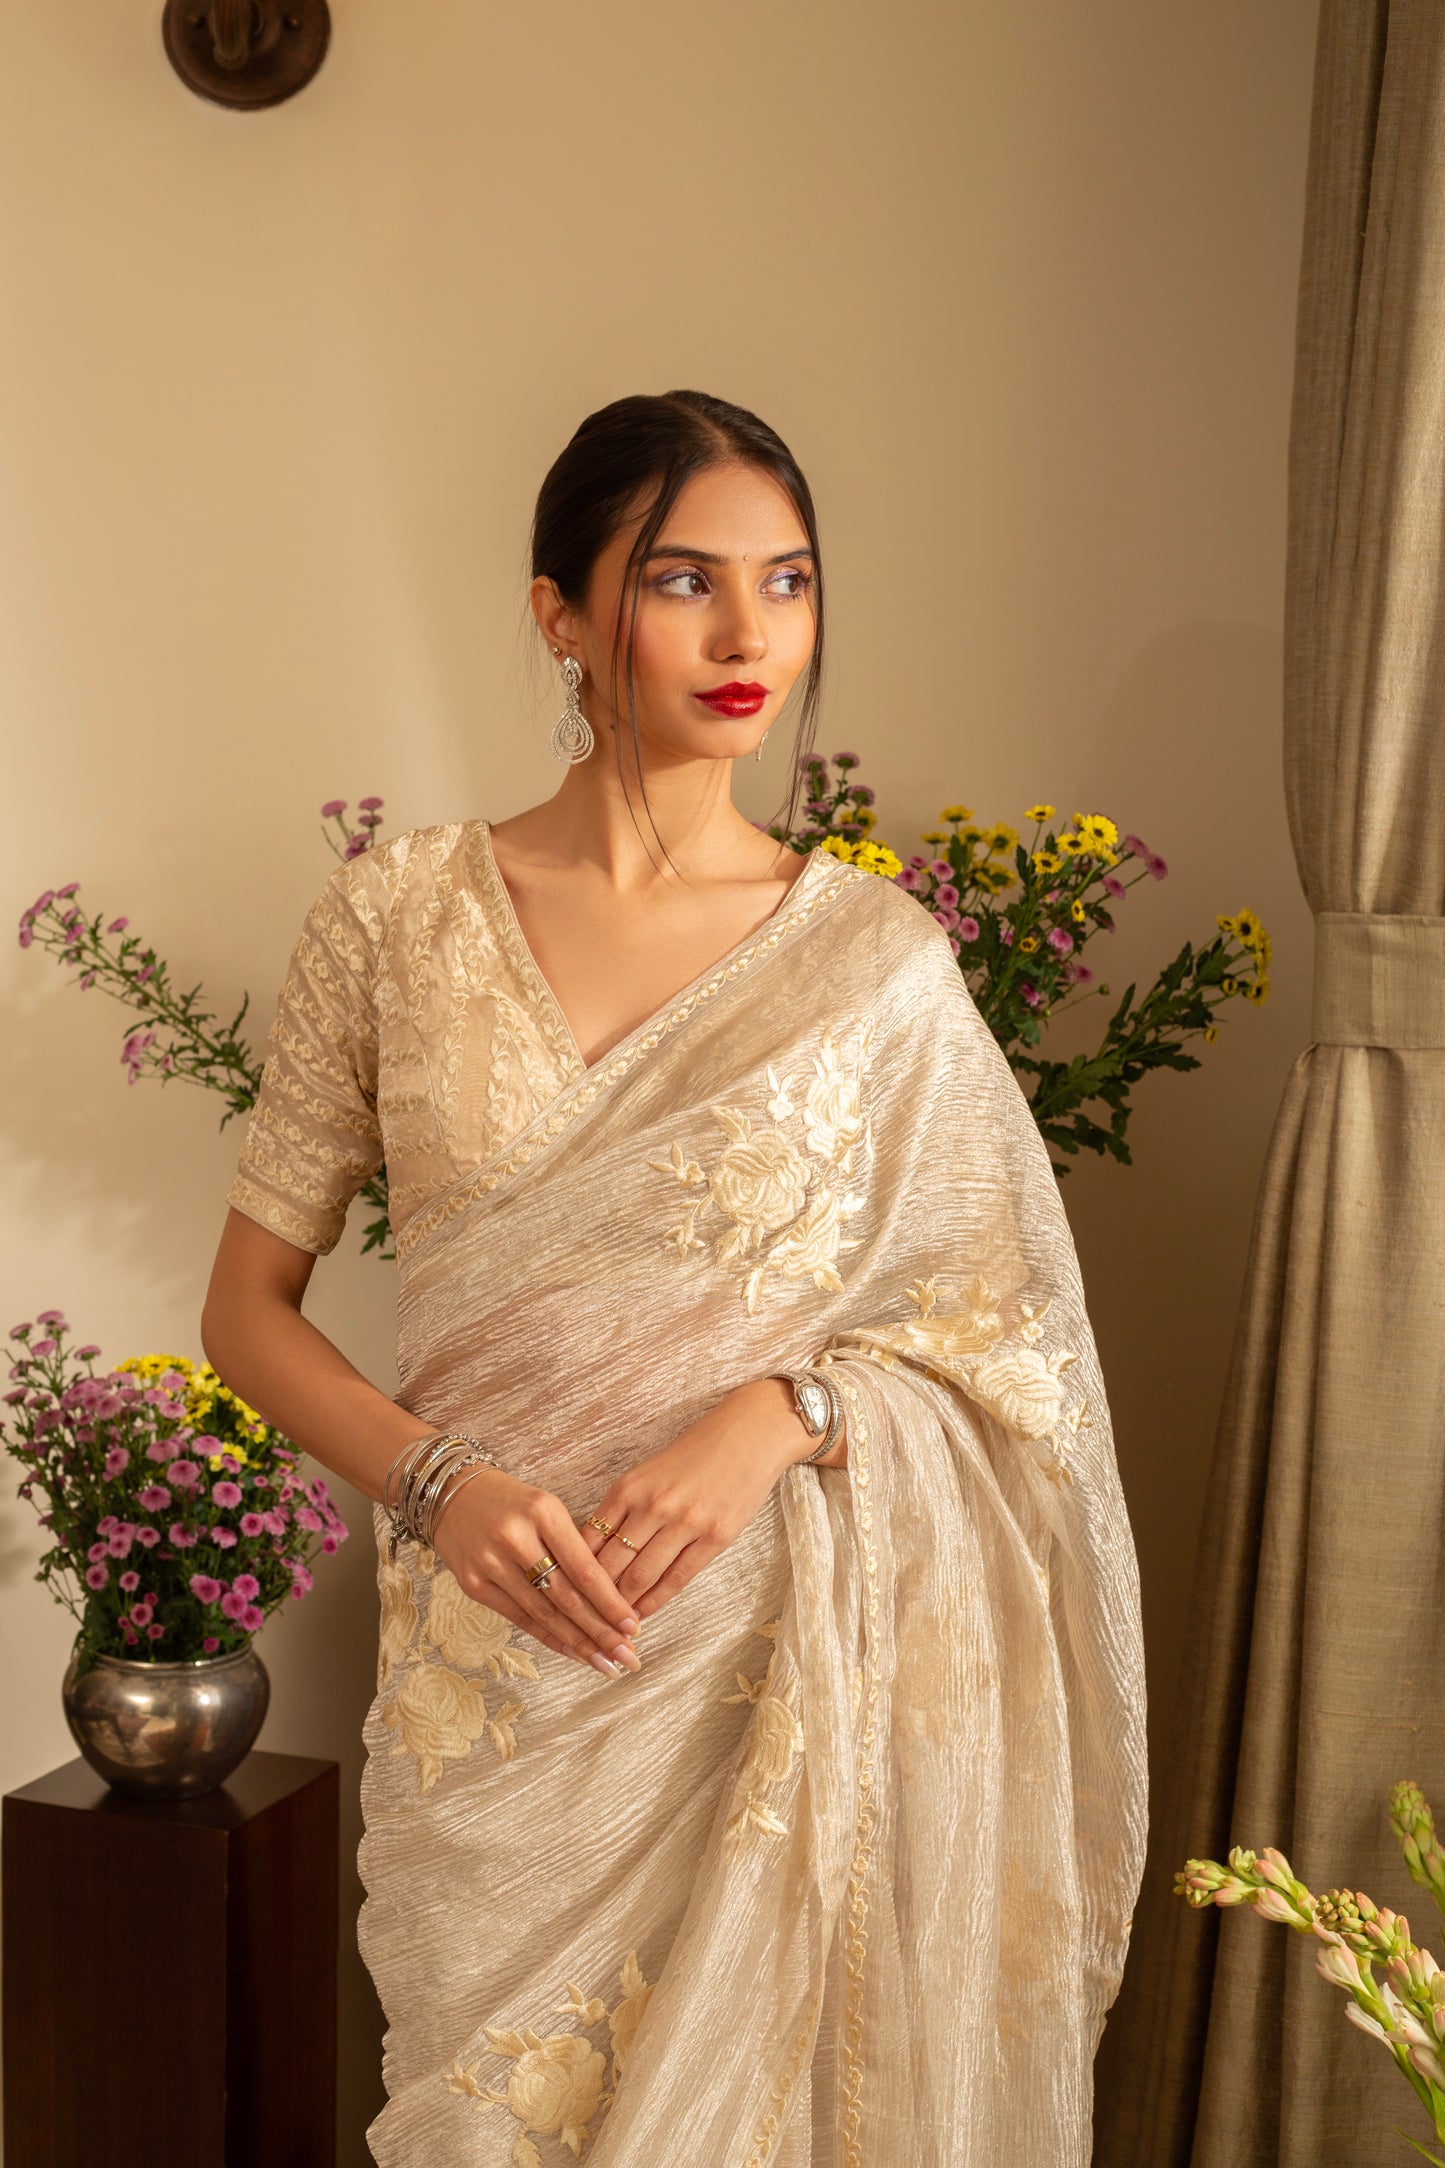 Gulab Soft Silver Pure Silk Tissue Handloom Saree with Parsi Embroidery